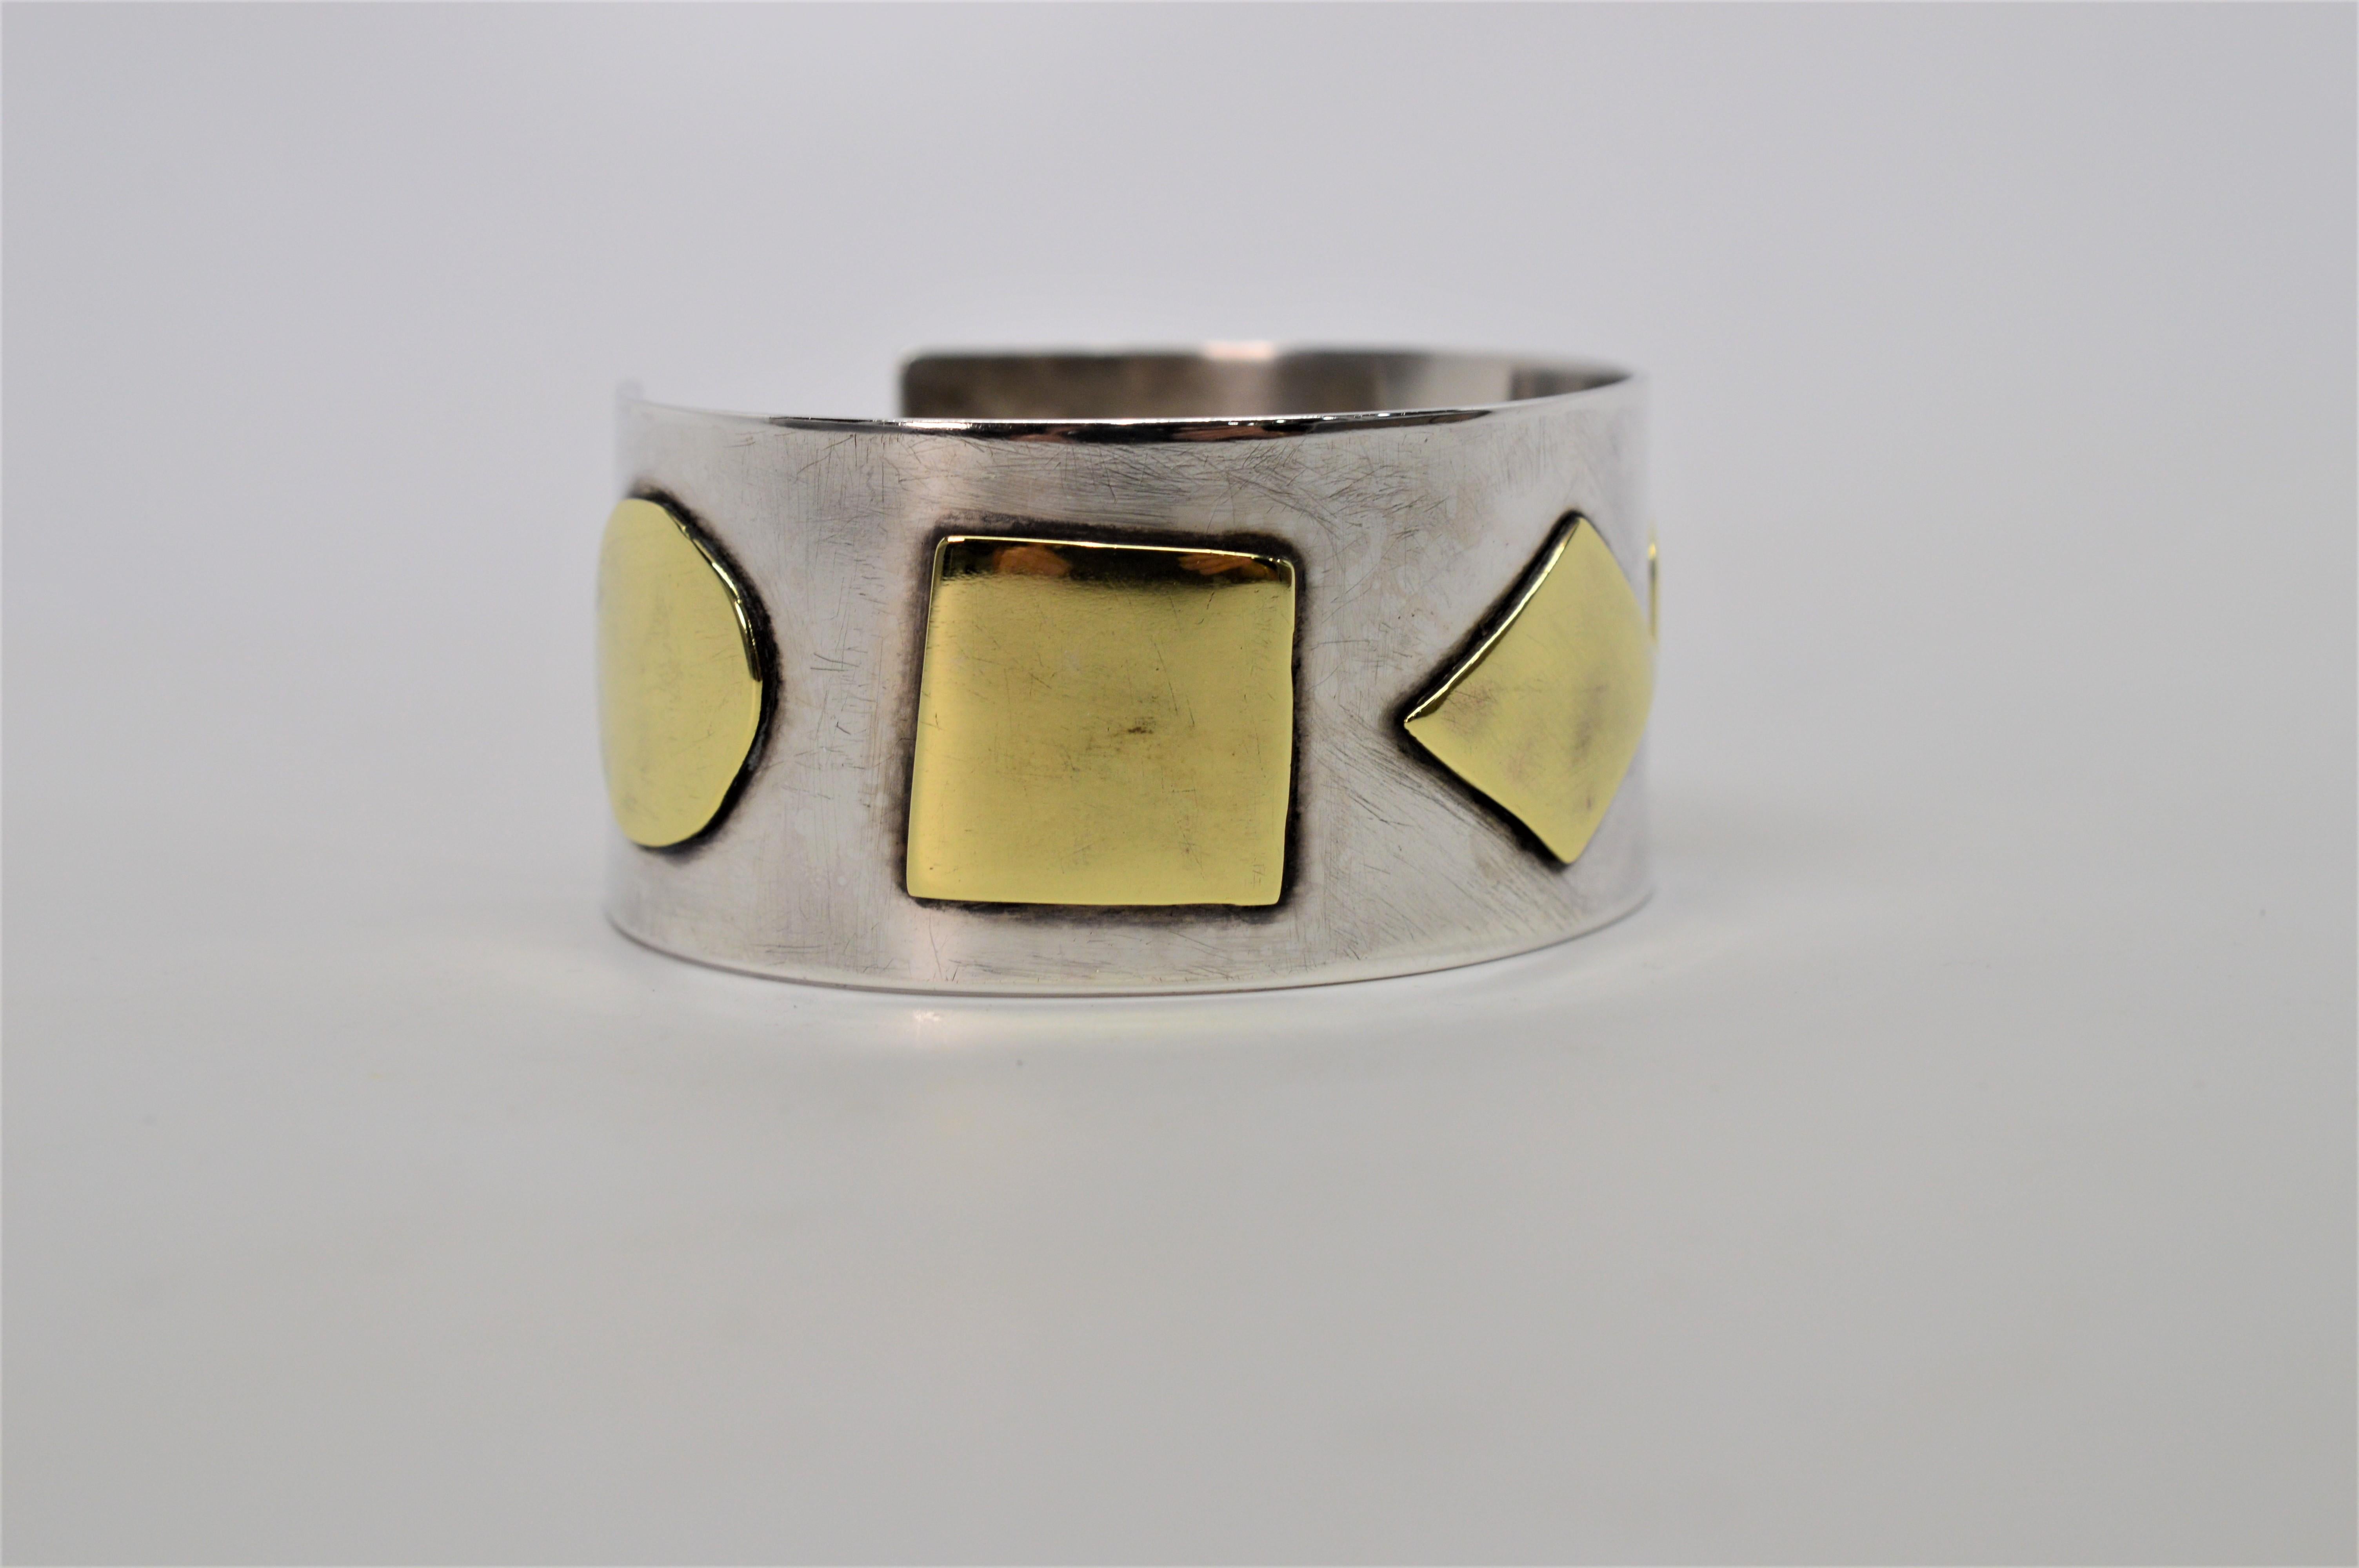 Craft Sterling Silver Cuff Bracelet with Brass Appliques In Good Condition For Sale In Mount Kisco, NY